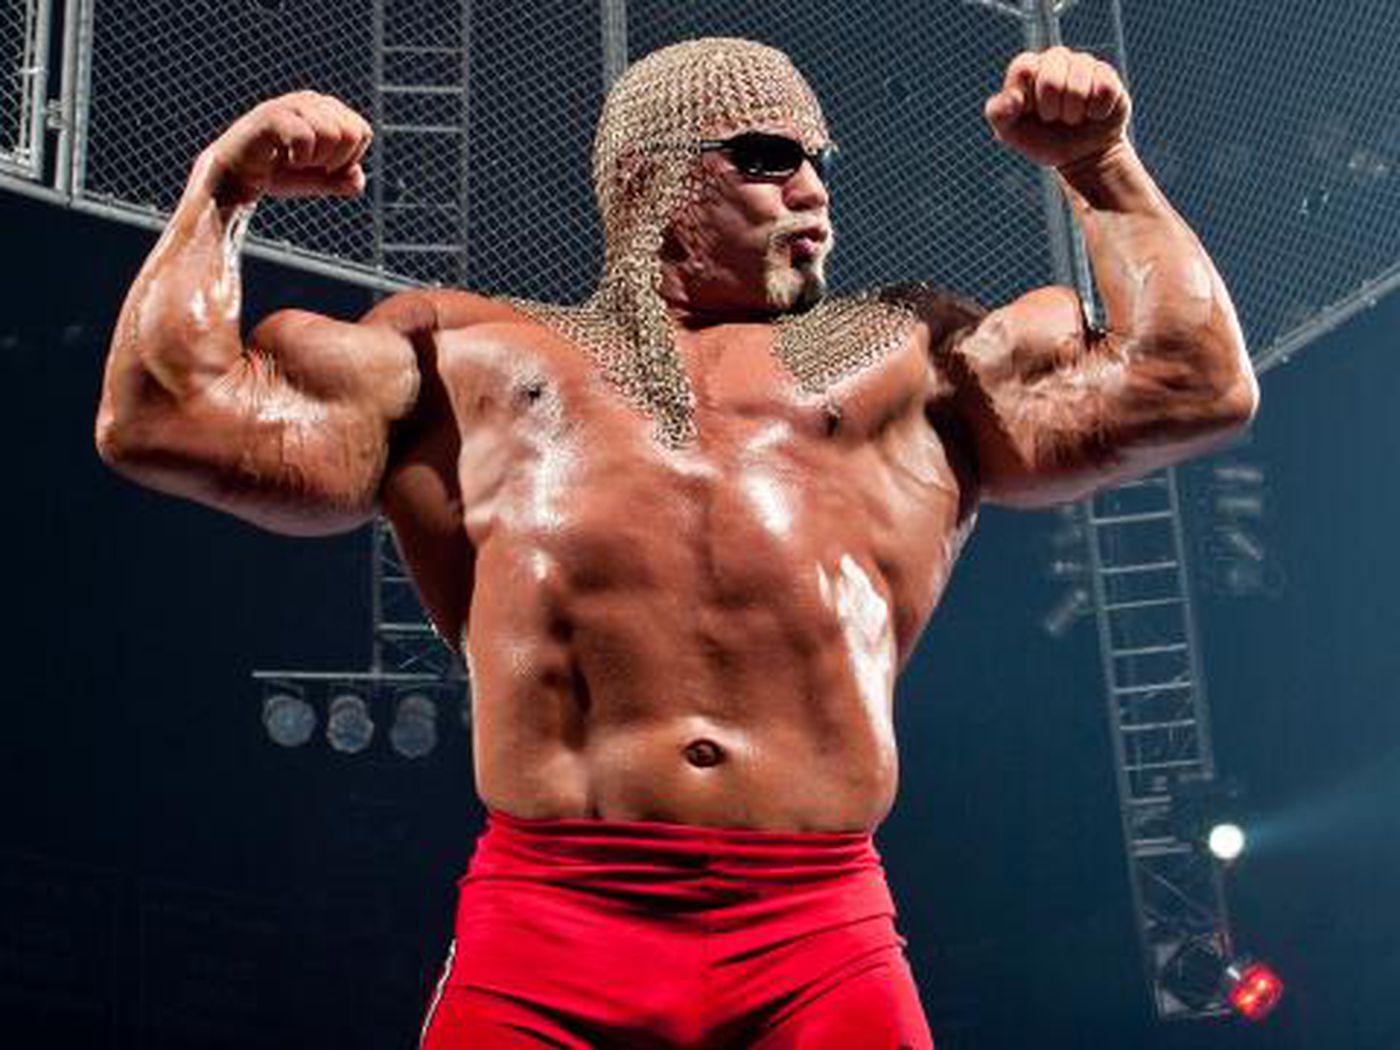 Scott Steiner trashes Triple H and the WWE Hall of Fame like only he can